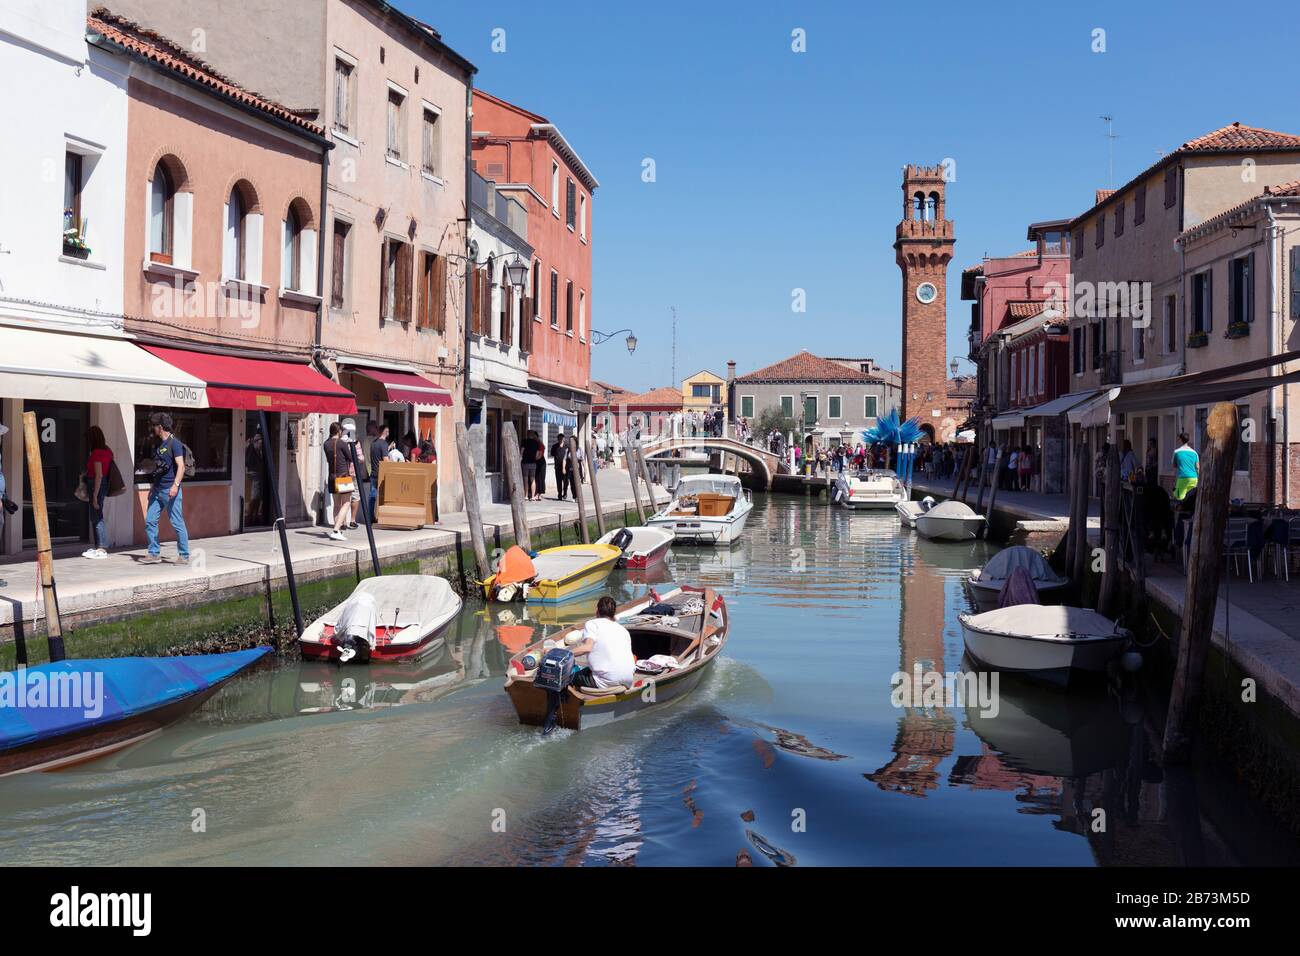 Typical canal scene, Murano, Province of Venice, Italy, Stock Photo